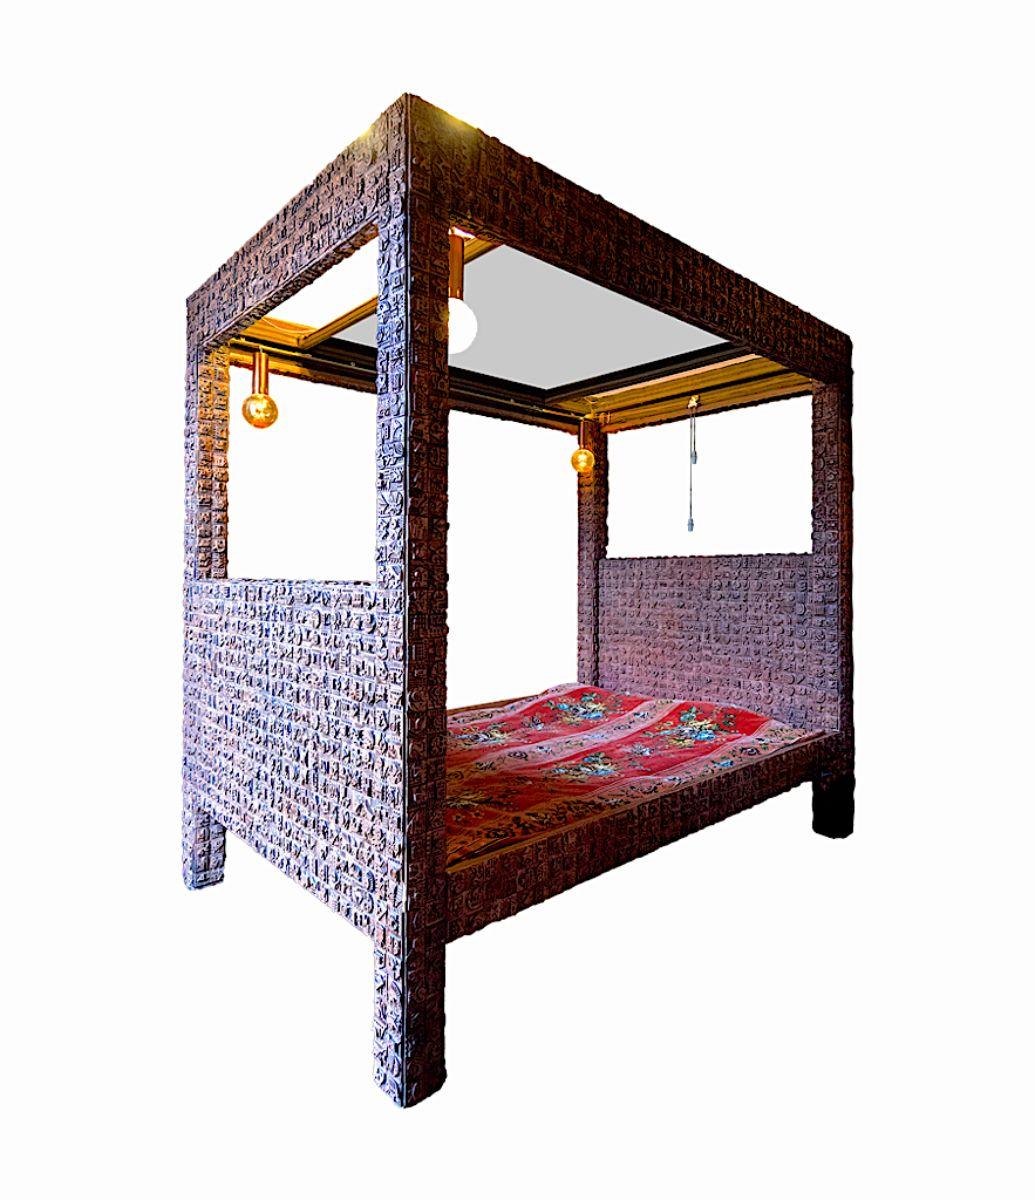 English Amazing Sculptural Bed by Artist Ron Hitchins with 3582 Unique Ceramic Tiles For Sale